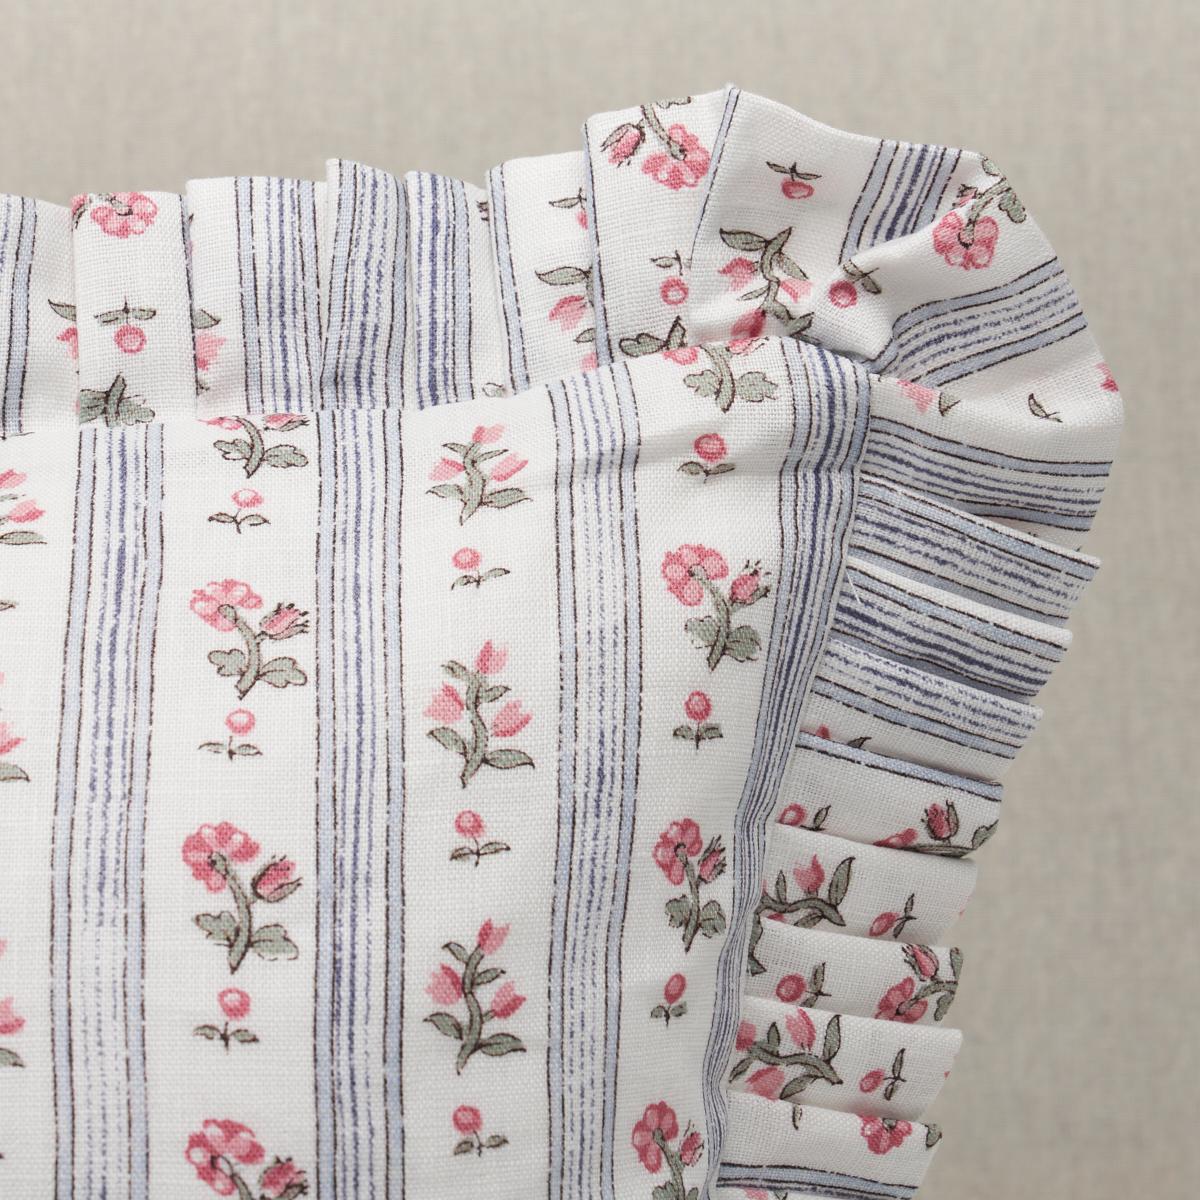 This pillow features Cabanon Stripe with a fringe finish. A classic combination of flowers and stripes, this delicate small-scale design has a lovely handprinted look. Cabanon Stripe fabric in rose is wonderfully charming and easy to use. Pillow